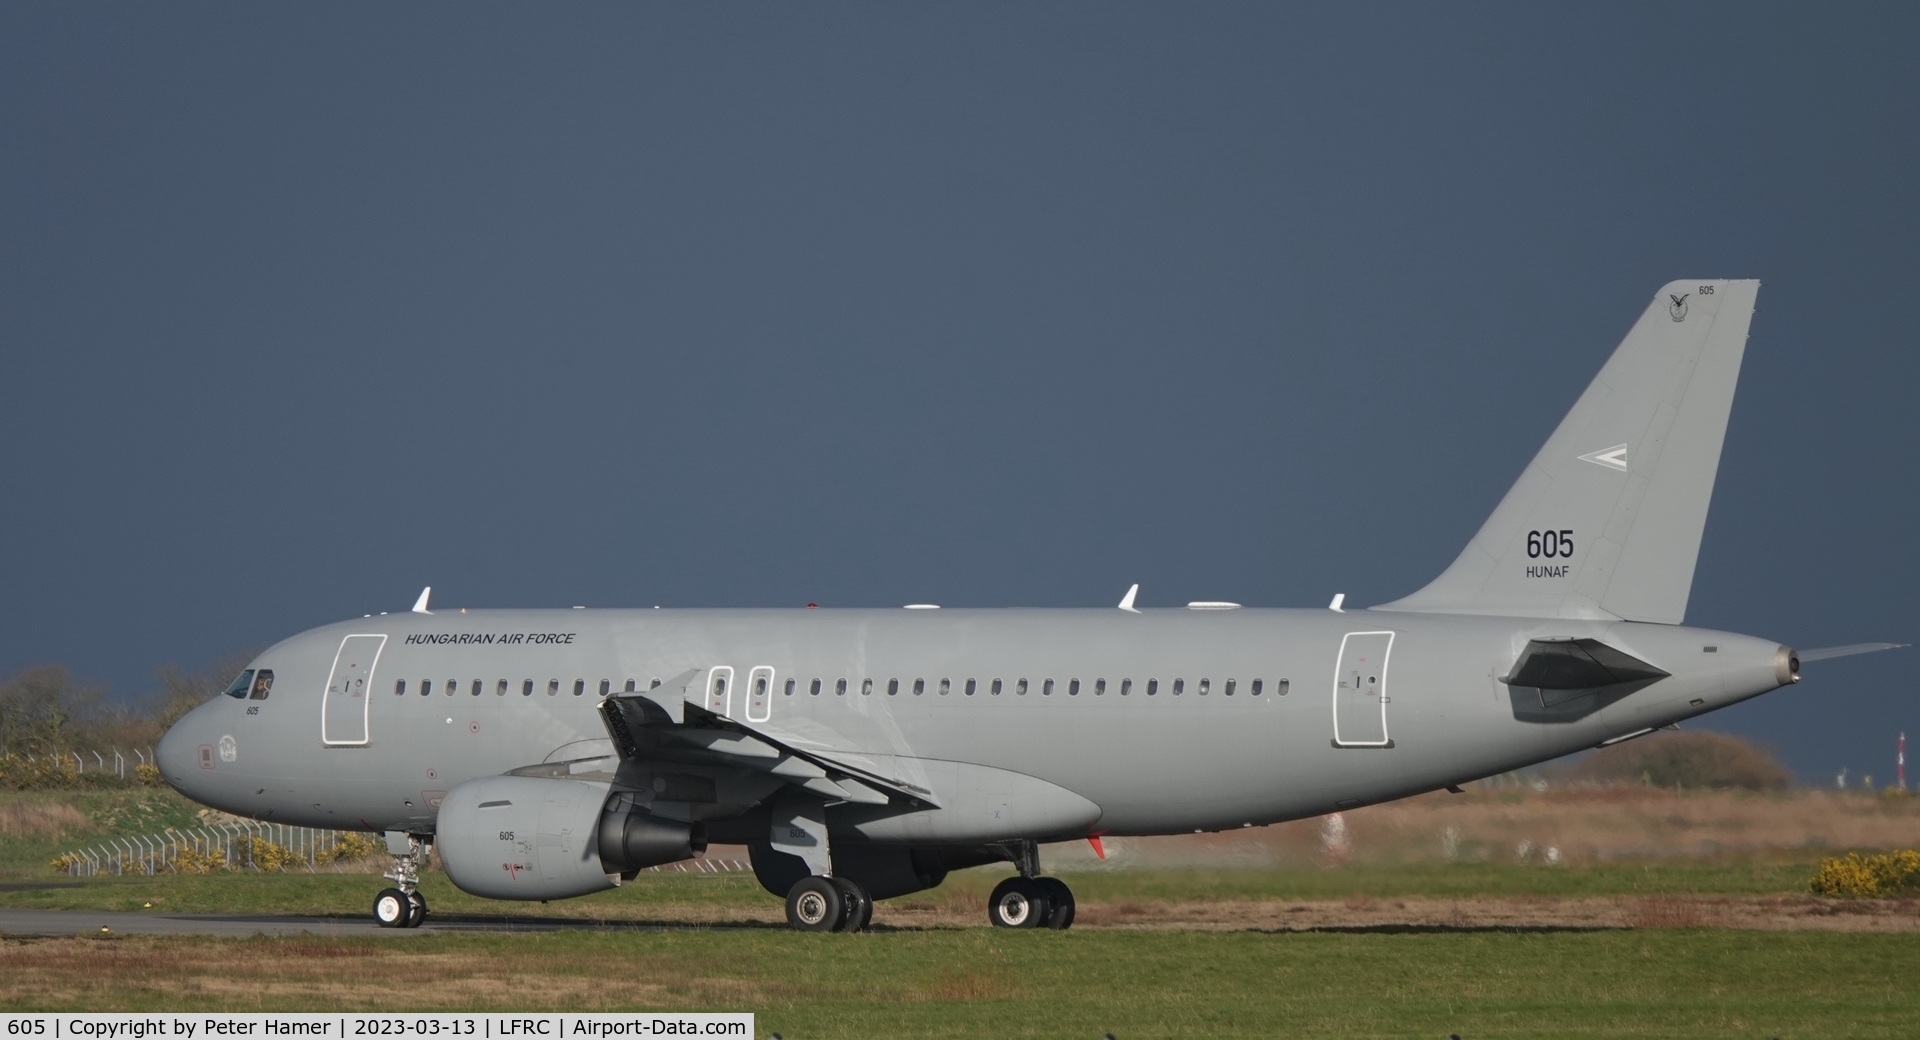 605, 2009 Airbus A319-112 C/N 3865, Cherbourg